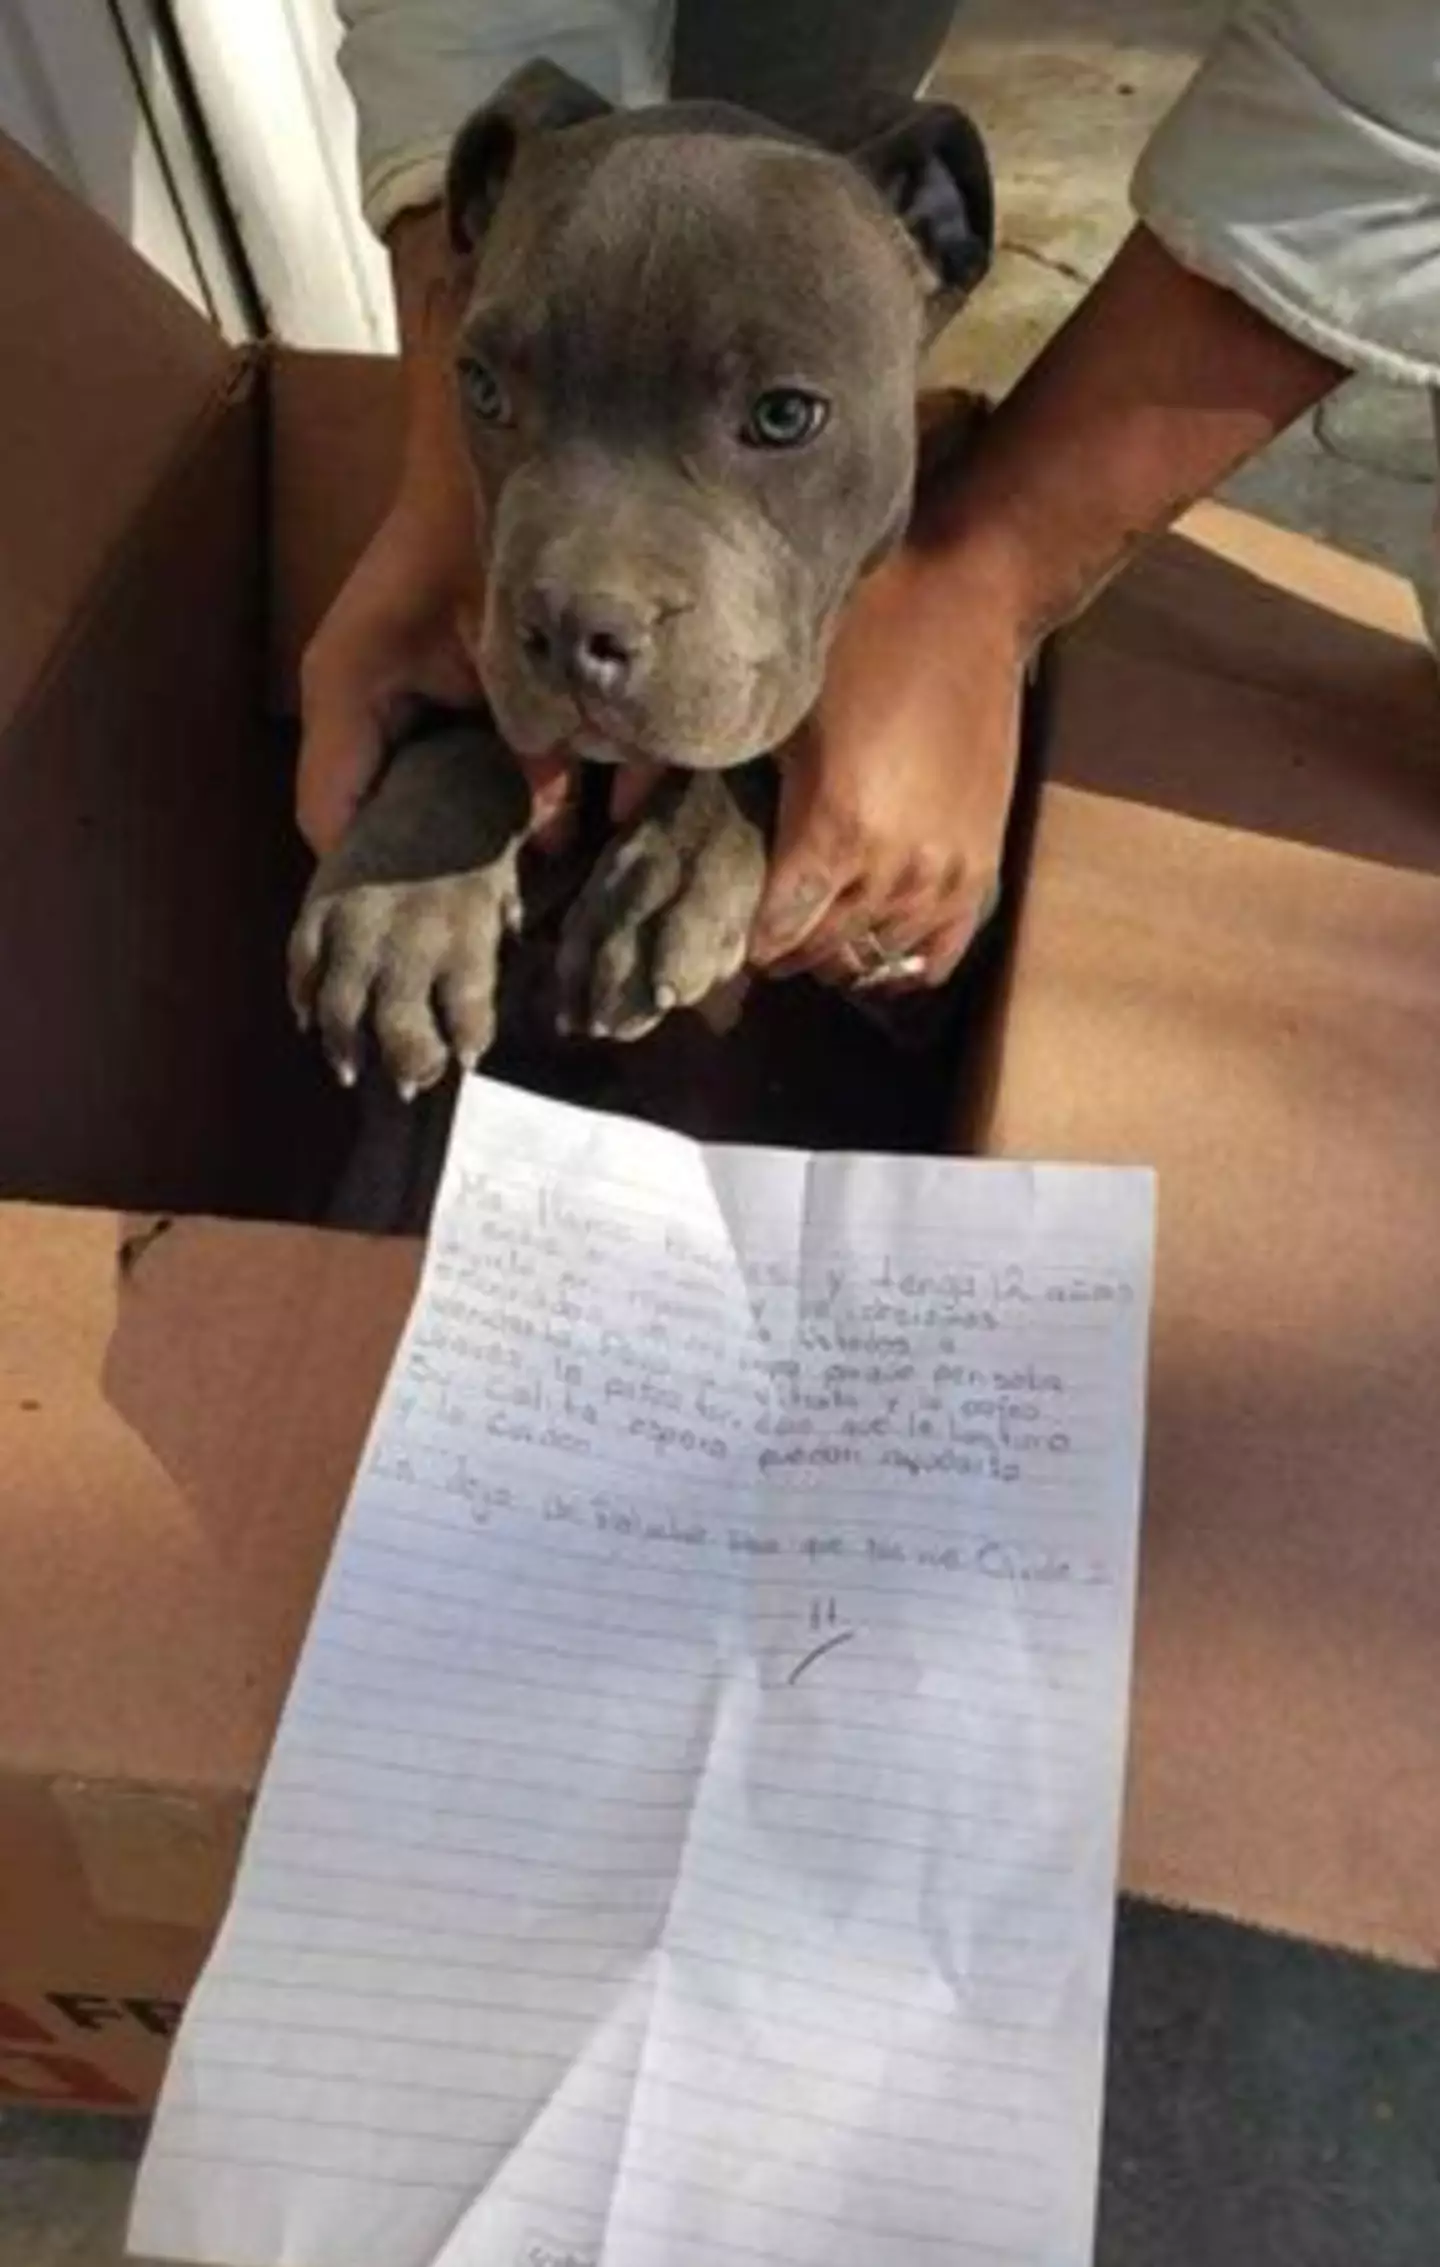 A 12-year-old lad in Mexico left his adorable little puppy outside a shelter in a cardboard box.